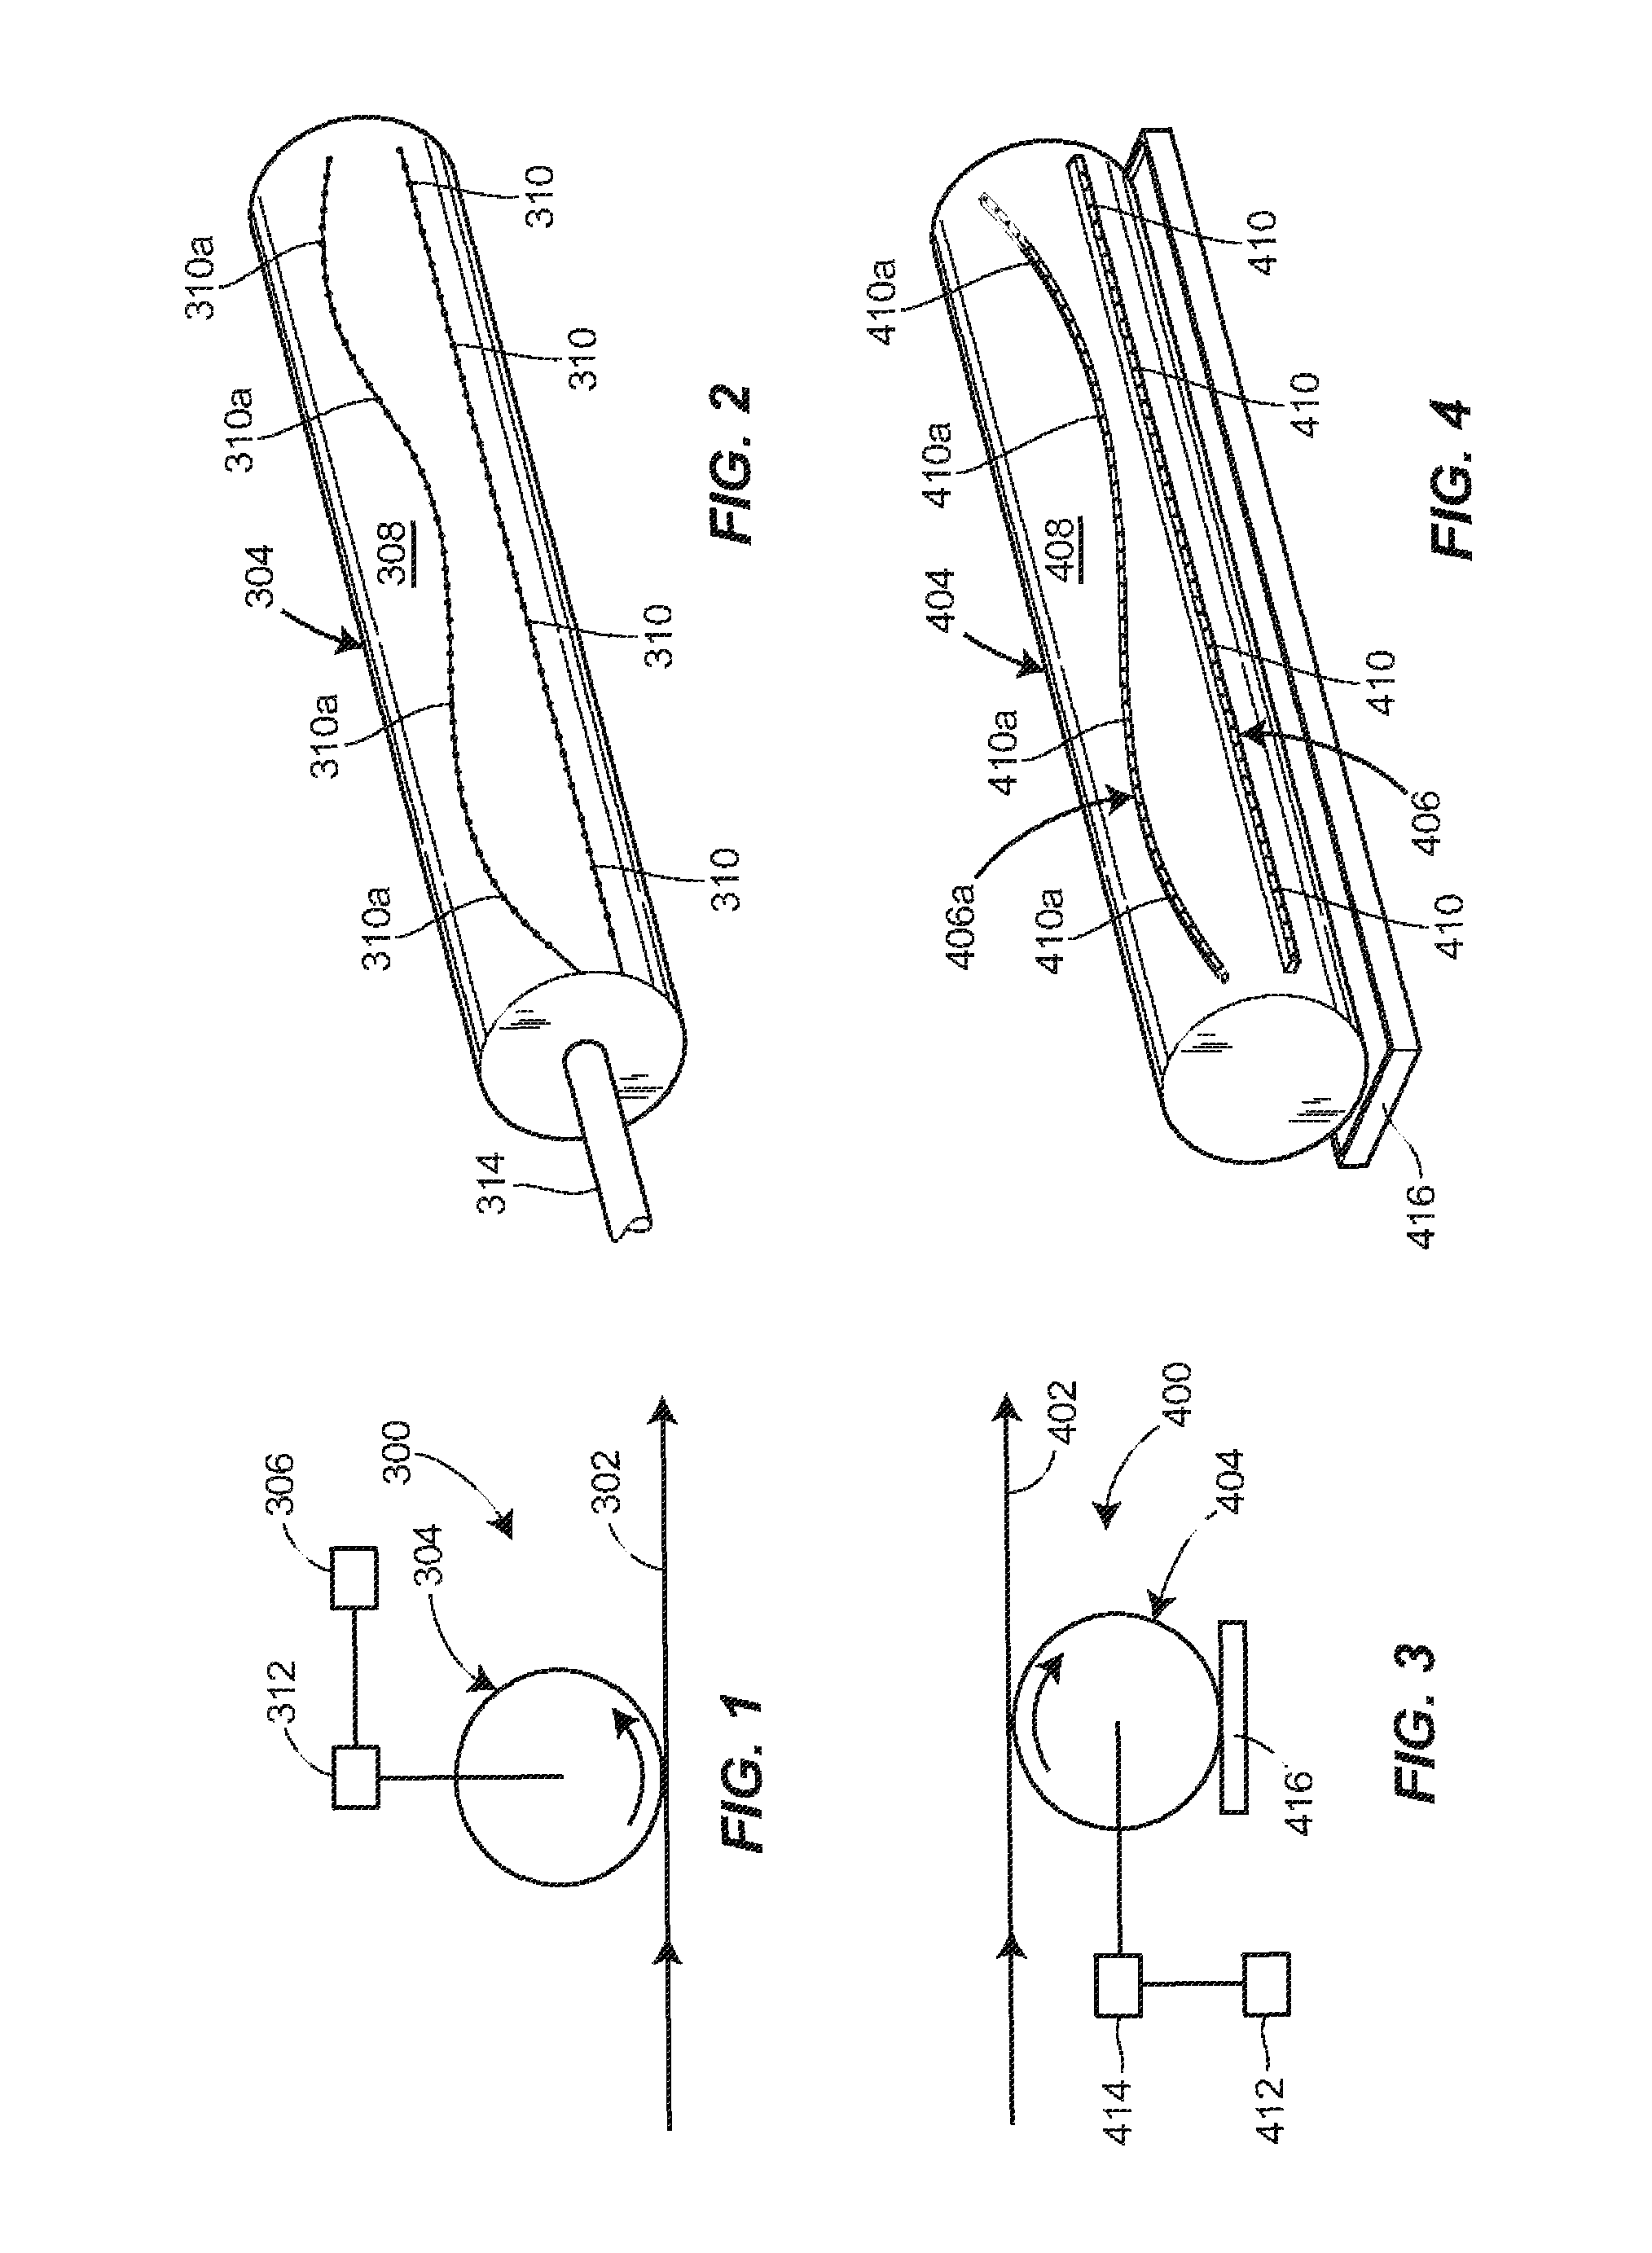 Apparatus for perforating a web material